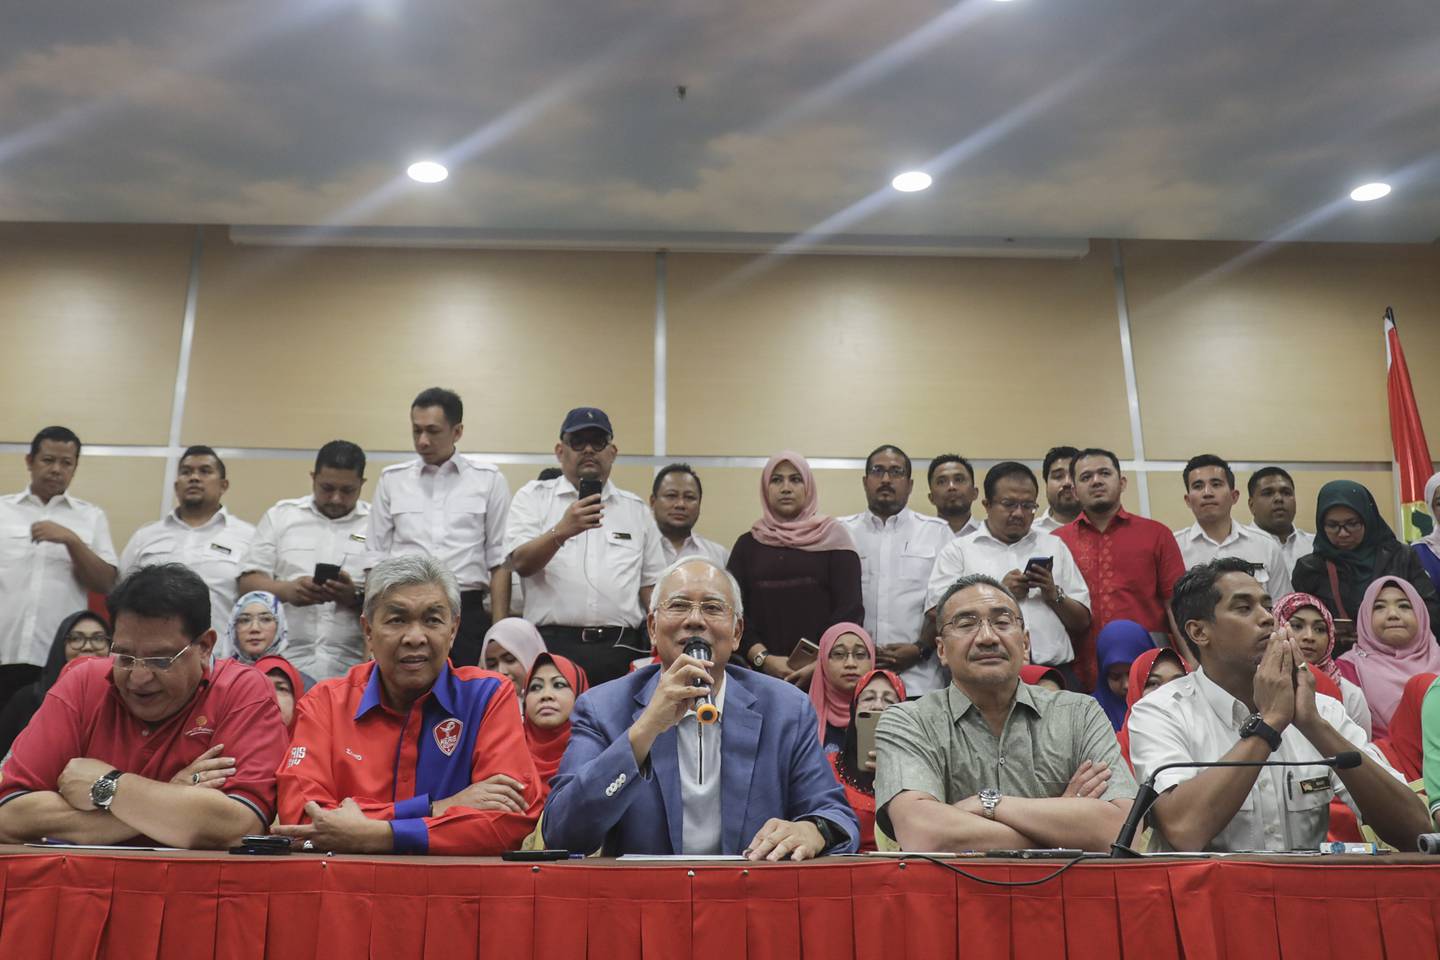 epa06729566 United Malays National Organisation (UMNO) party president and and chairman of the Barisan National (National Front coalition), Najib Razak speaks during a press conference in Kuala Lumpur, Malaysia, 12 May 2018. Razak stepped down as UMNO party president and chairman of the Barisan National coalition on 12 May. Former deputy prime minister Ahmad Zahid Hamidi will take over as acting president.  EPA/FAZRY ISMAIL